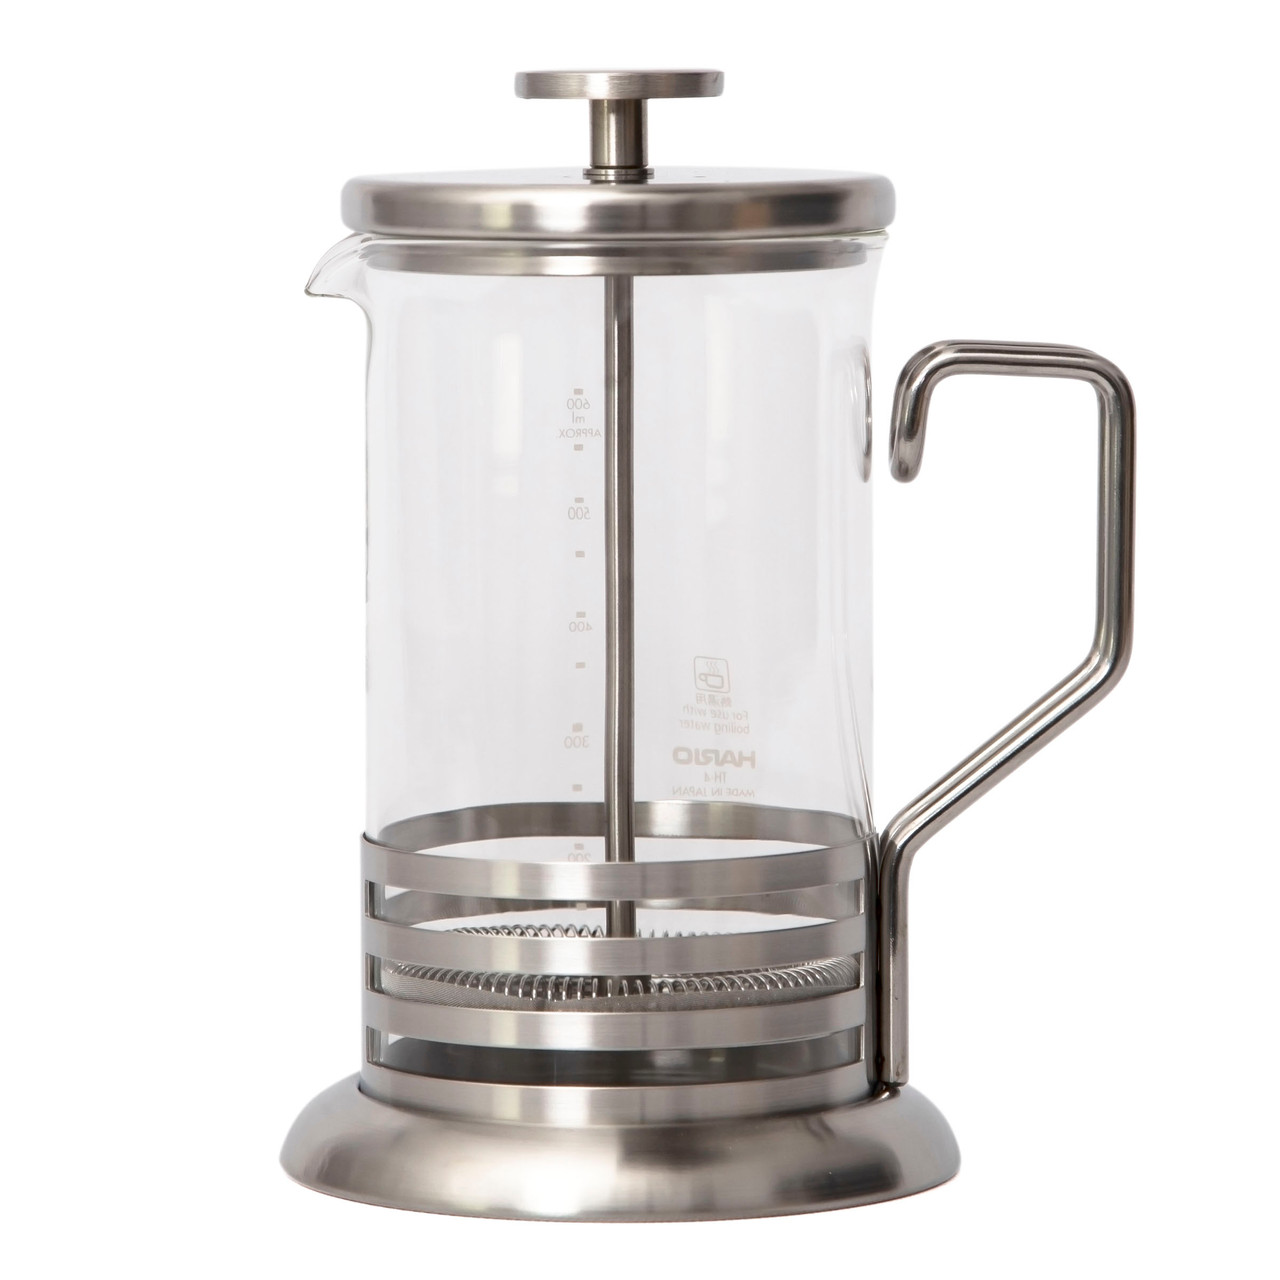 Hario Olive Wood 14 oz. Double-Walled Glass French Press with